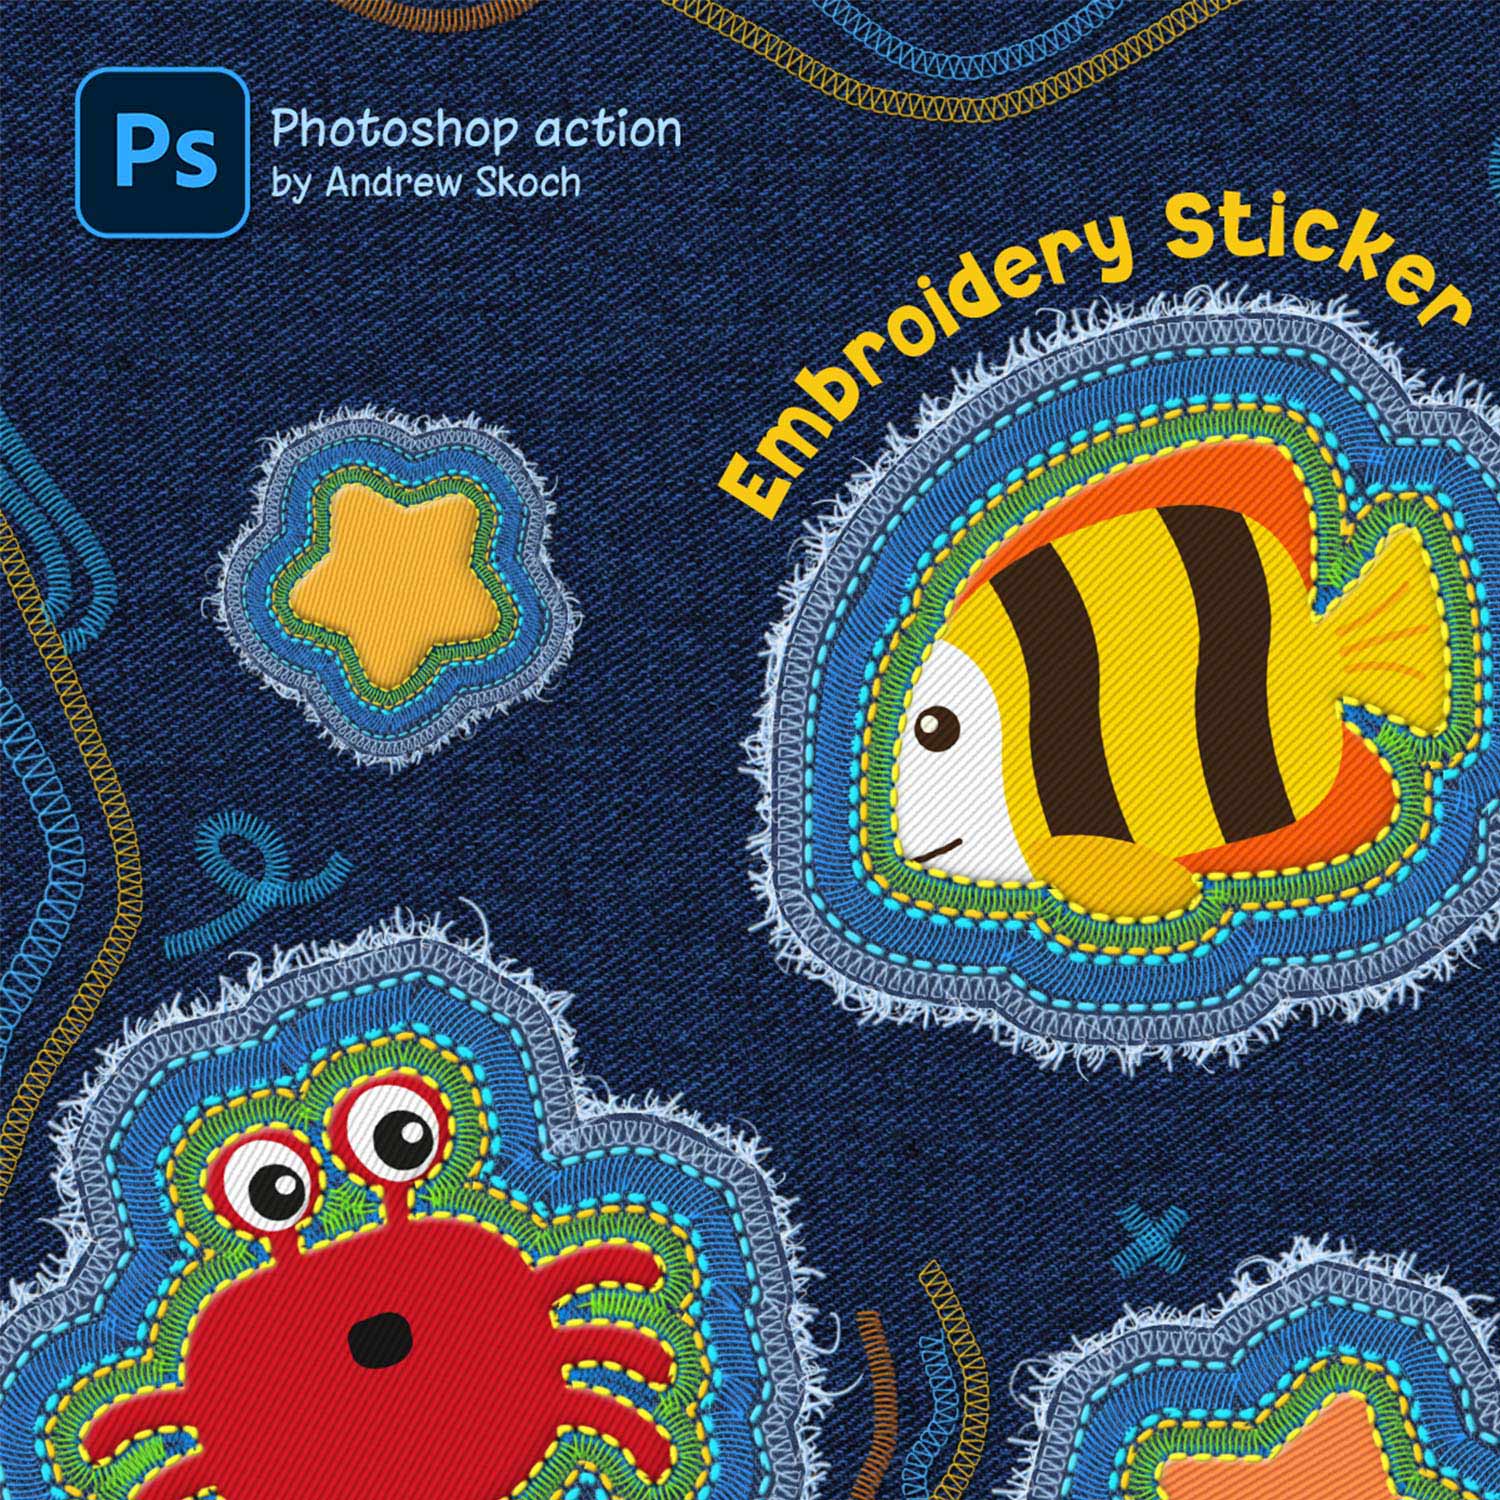 Embroidery Sticker Photoshop Action cover image.